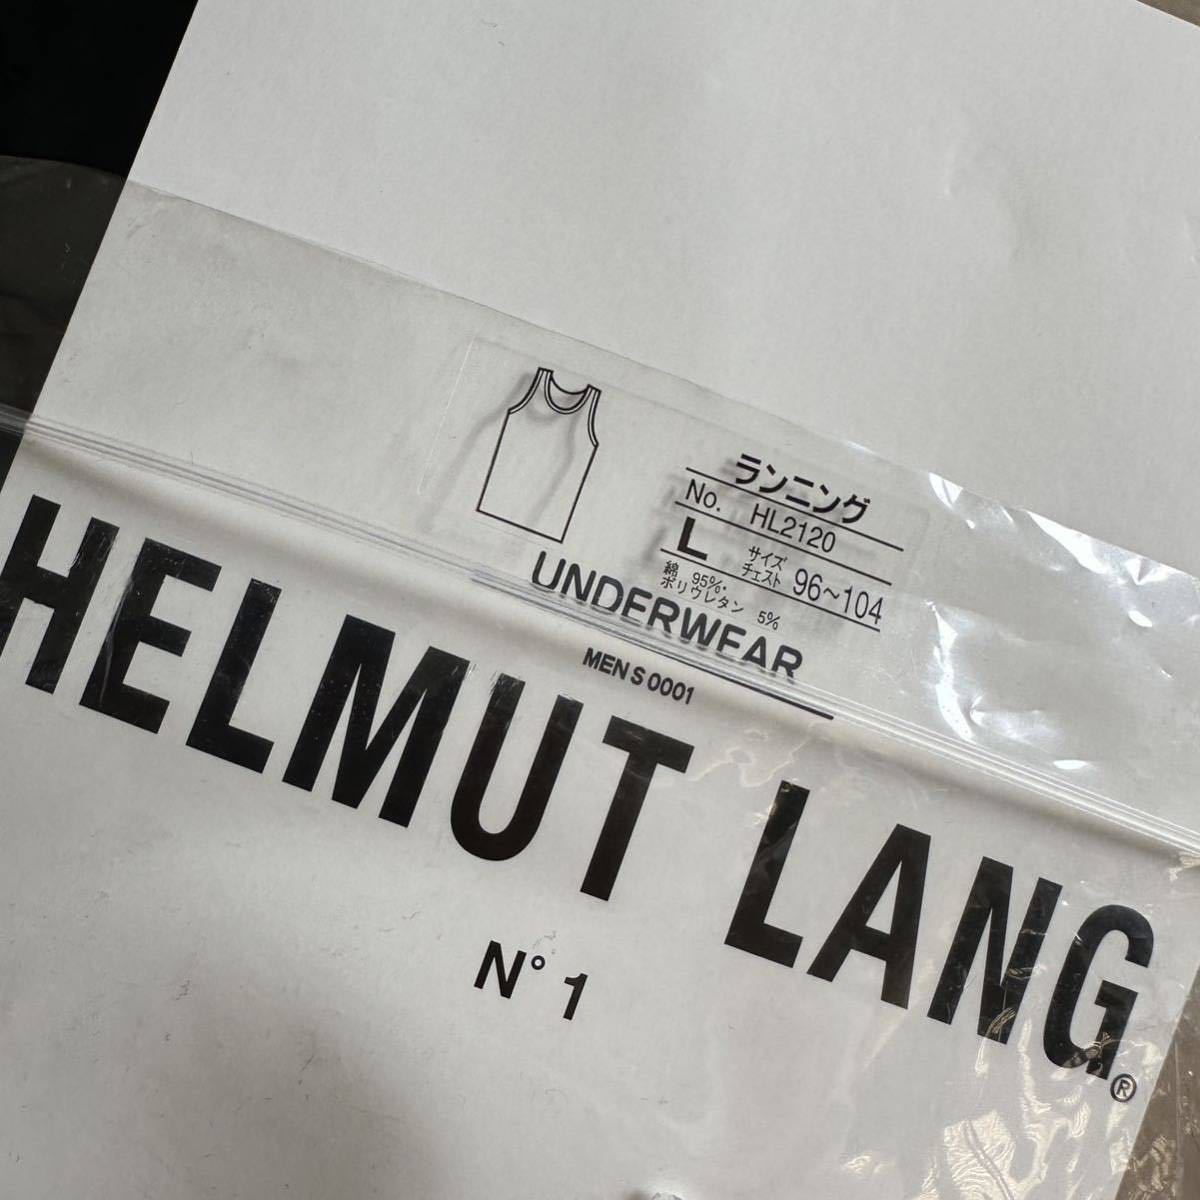 HELMUT LANG Helmut Lang 90S person himself period Tank Top new goods unused goods Dead Stock size L made in Japan 